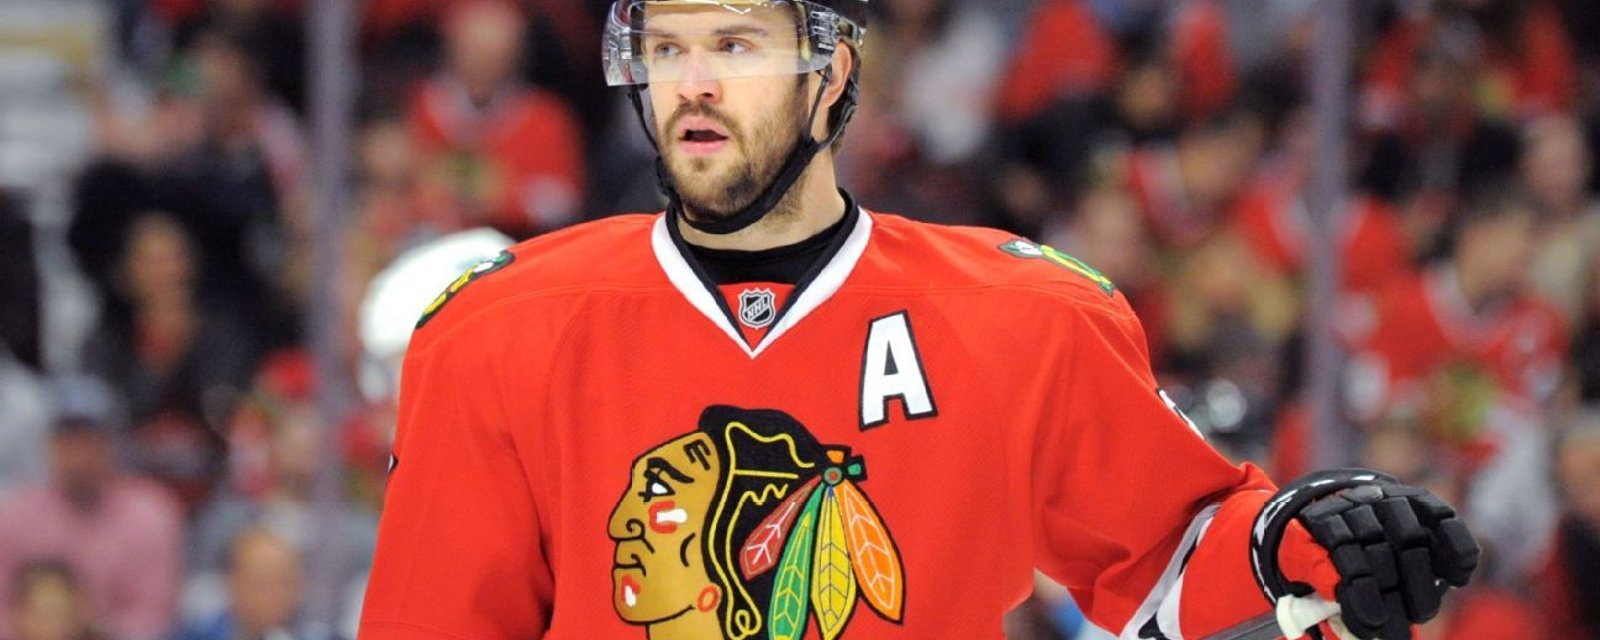 Seabrook hints at trade as he gets scratched for the second time this season